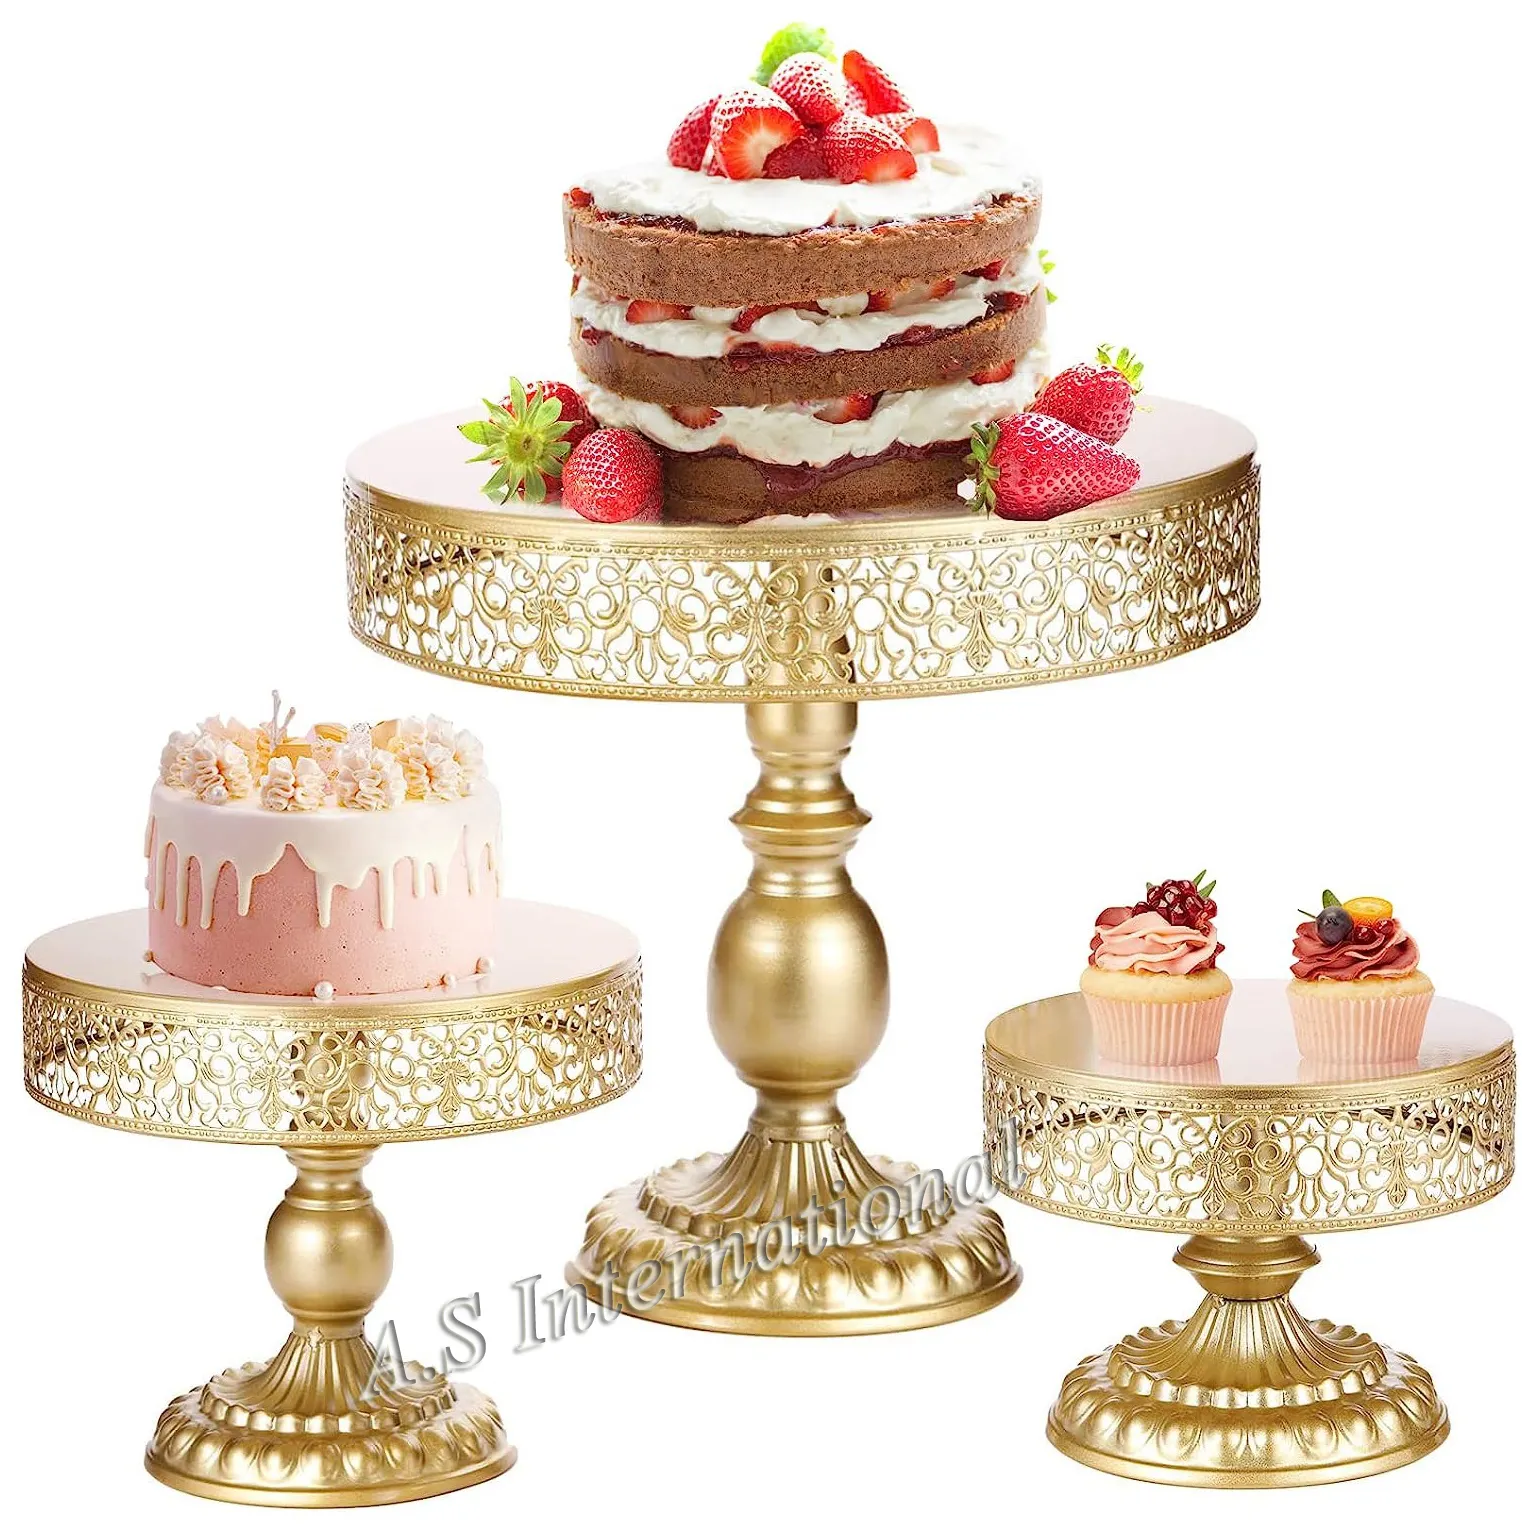 High Quality Metal Cake Stand Set Of 3 Round Hollow Metal Dessert Tray Display Cupcake Holder Decor Cake Stand For Wedding Party